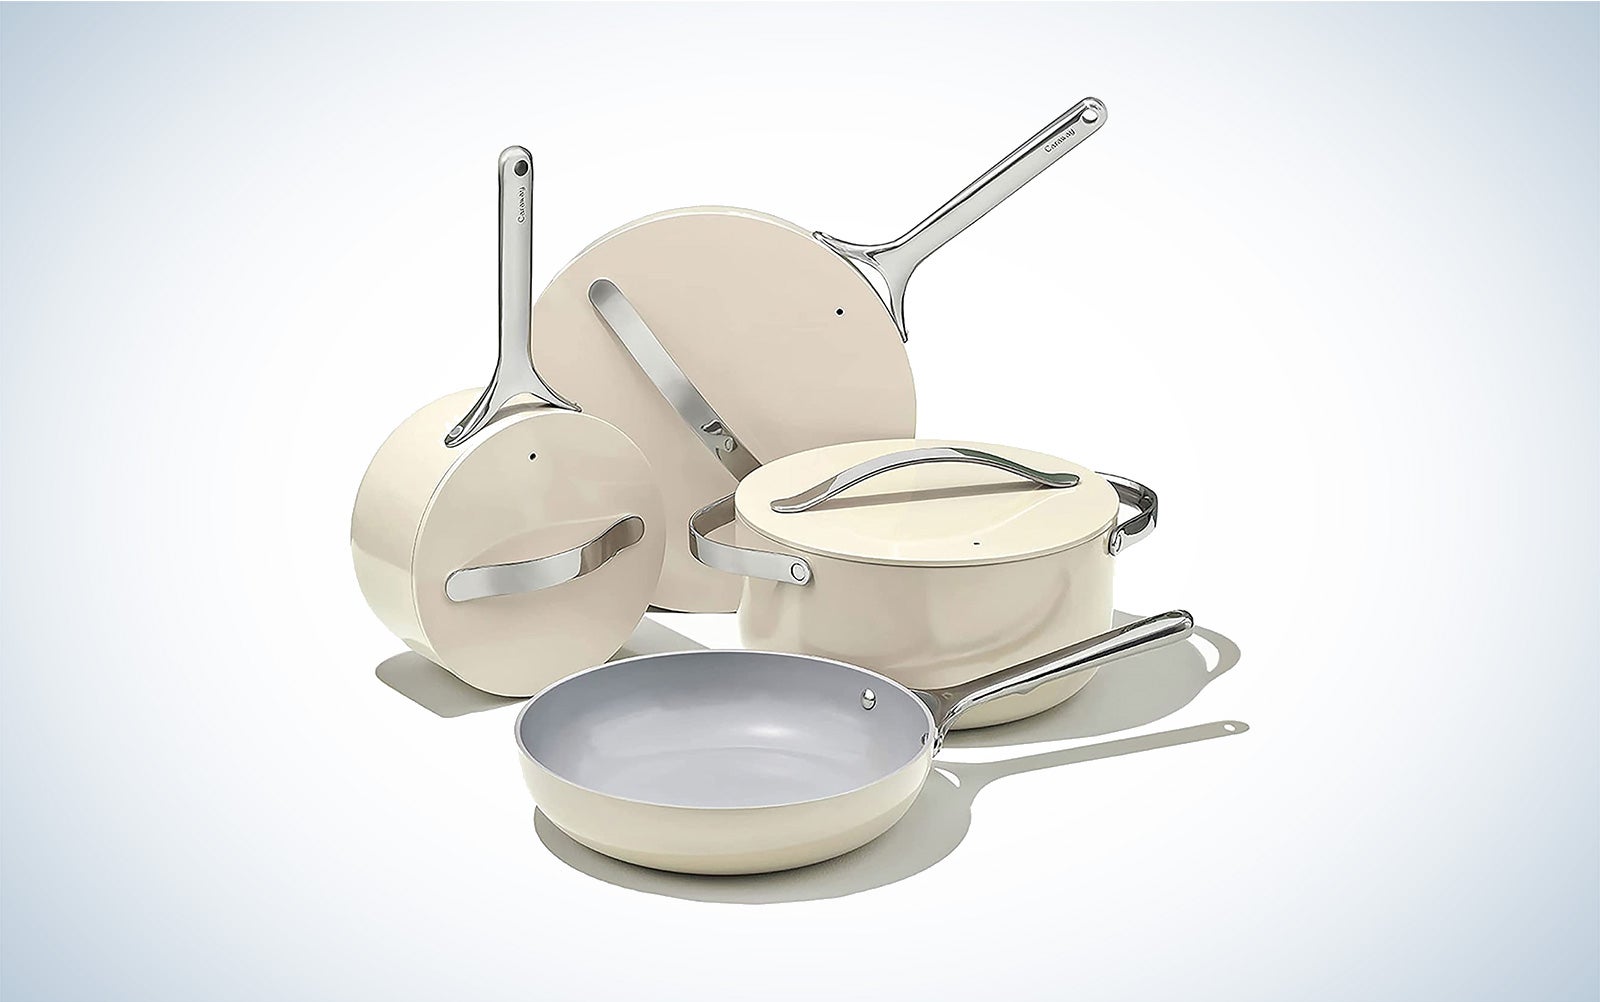 Caraway induction cookware on a plain background